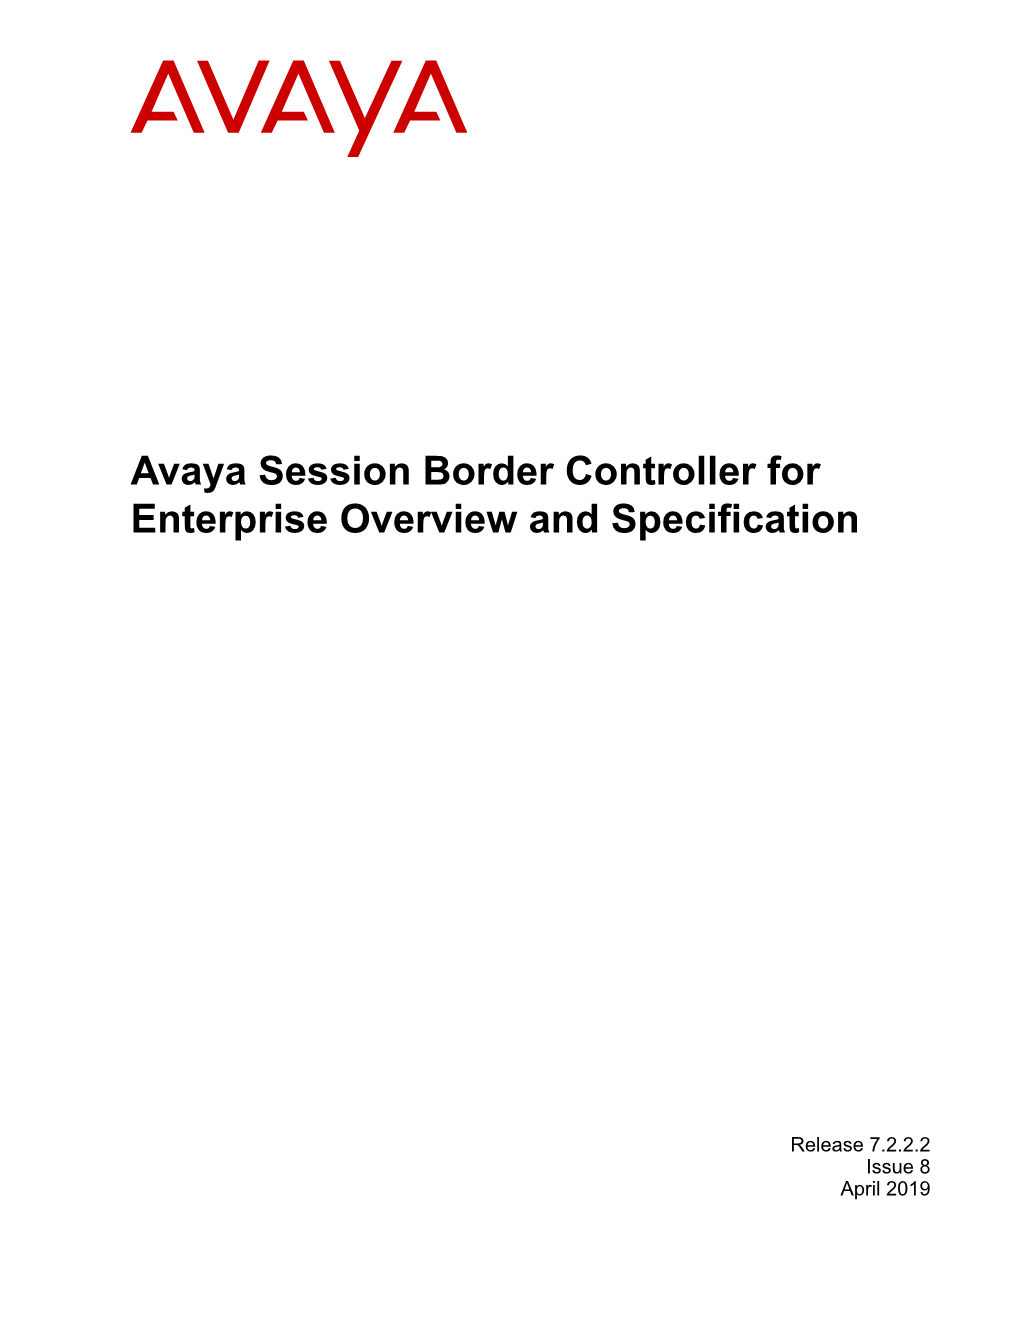 Avaya Session Border Controller for Enterprise Overview and Specification